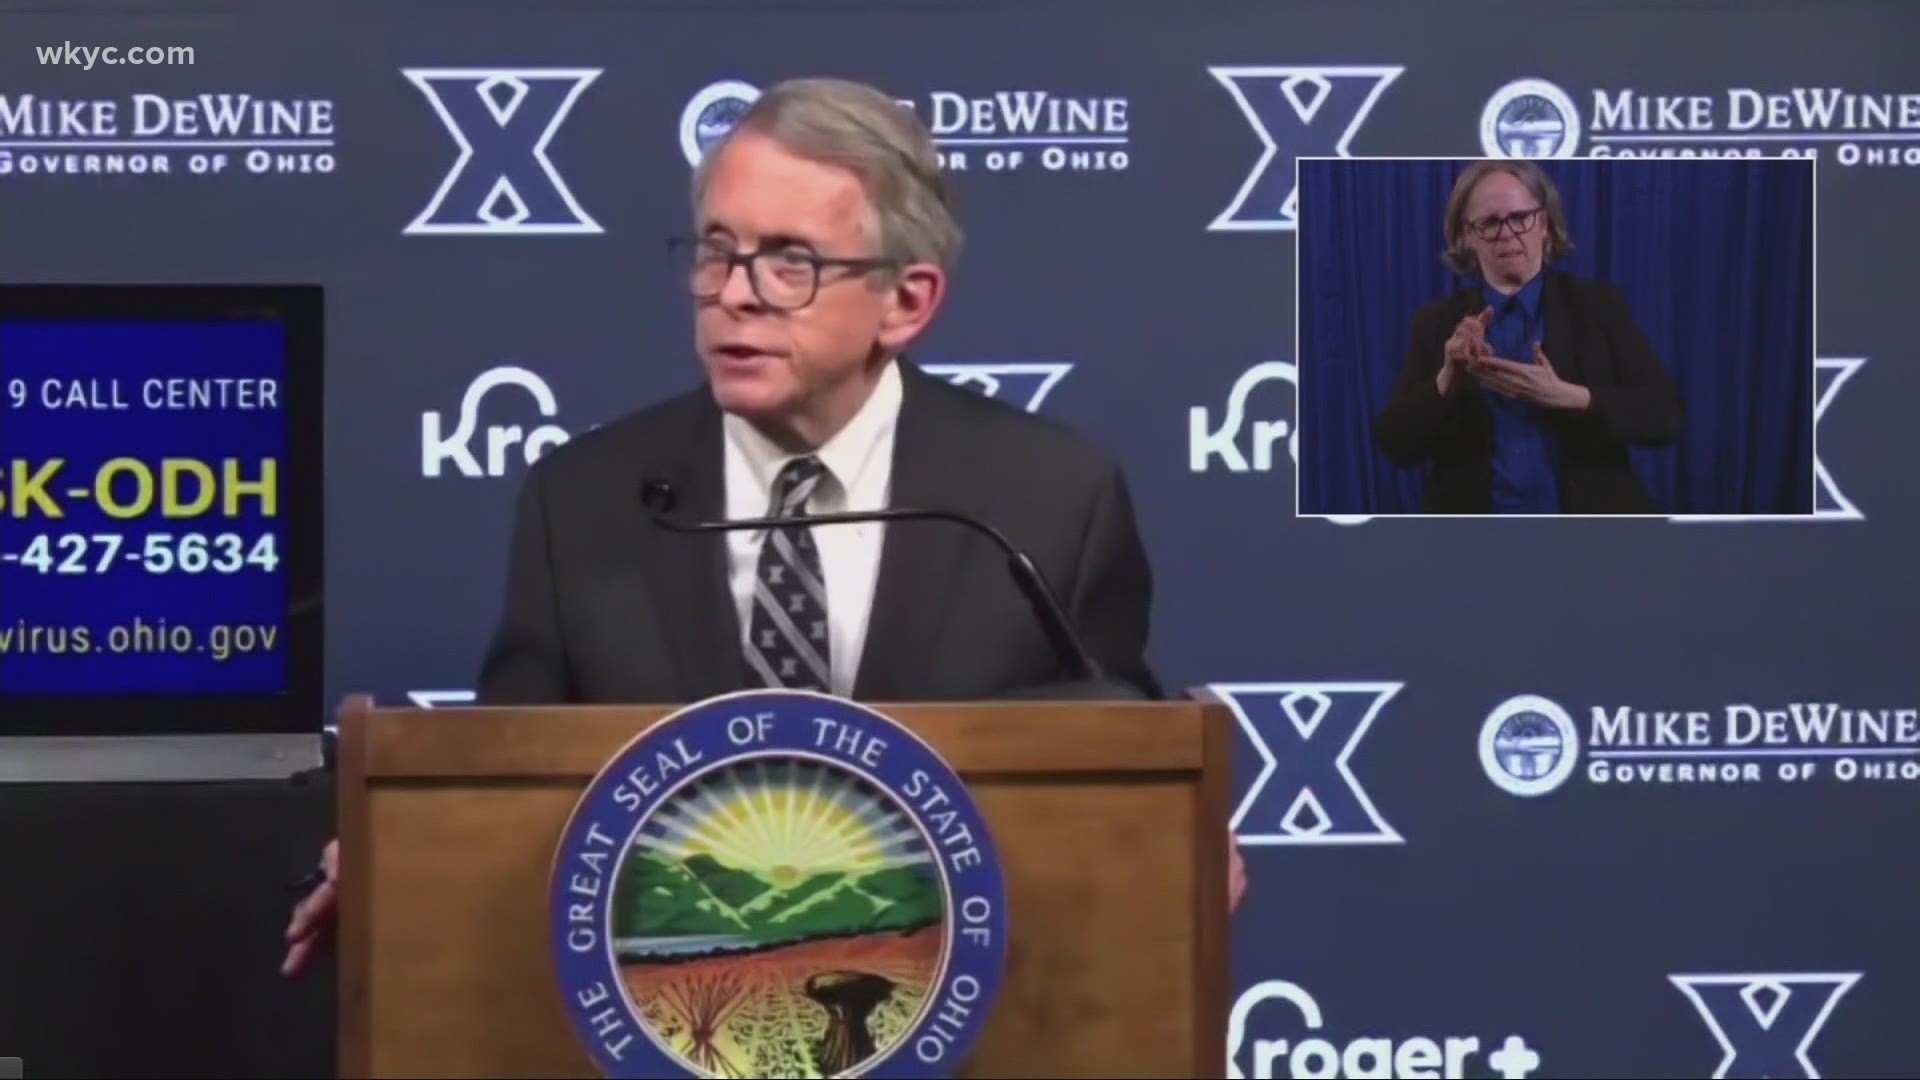 DeWine says the state is also able to expand its vaccine eligibility requirements. Laura Caso reports.